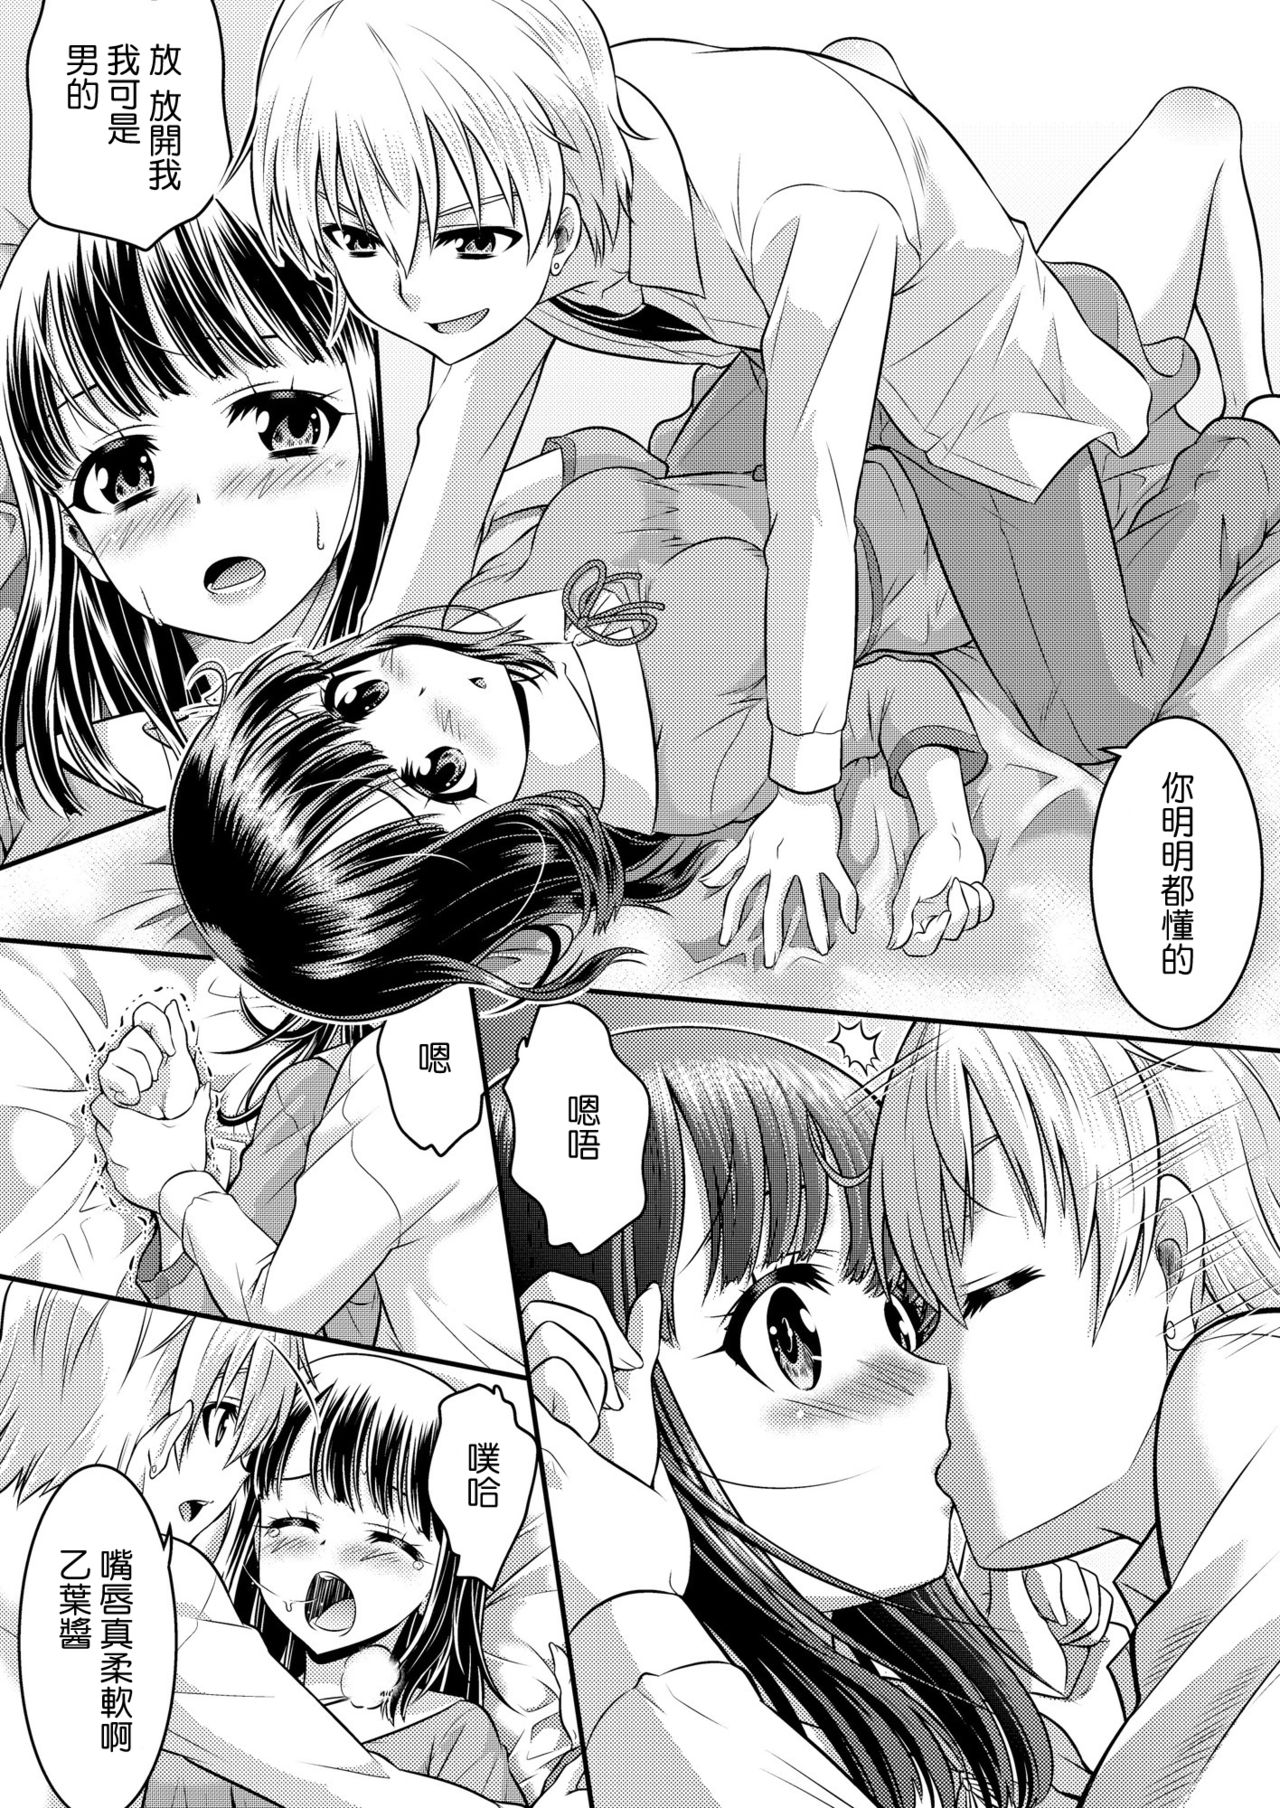 Metamorph ★ Coordination - I Become Whatever Girl I Crossdress As~ [Sister Arc, Classmate Arc] [Chinese] [瑞树汉化组] page 29 full